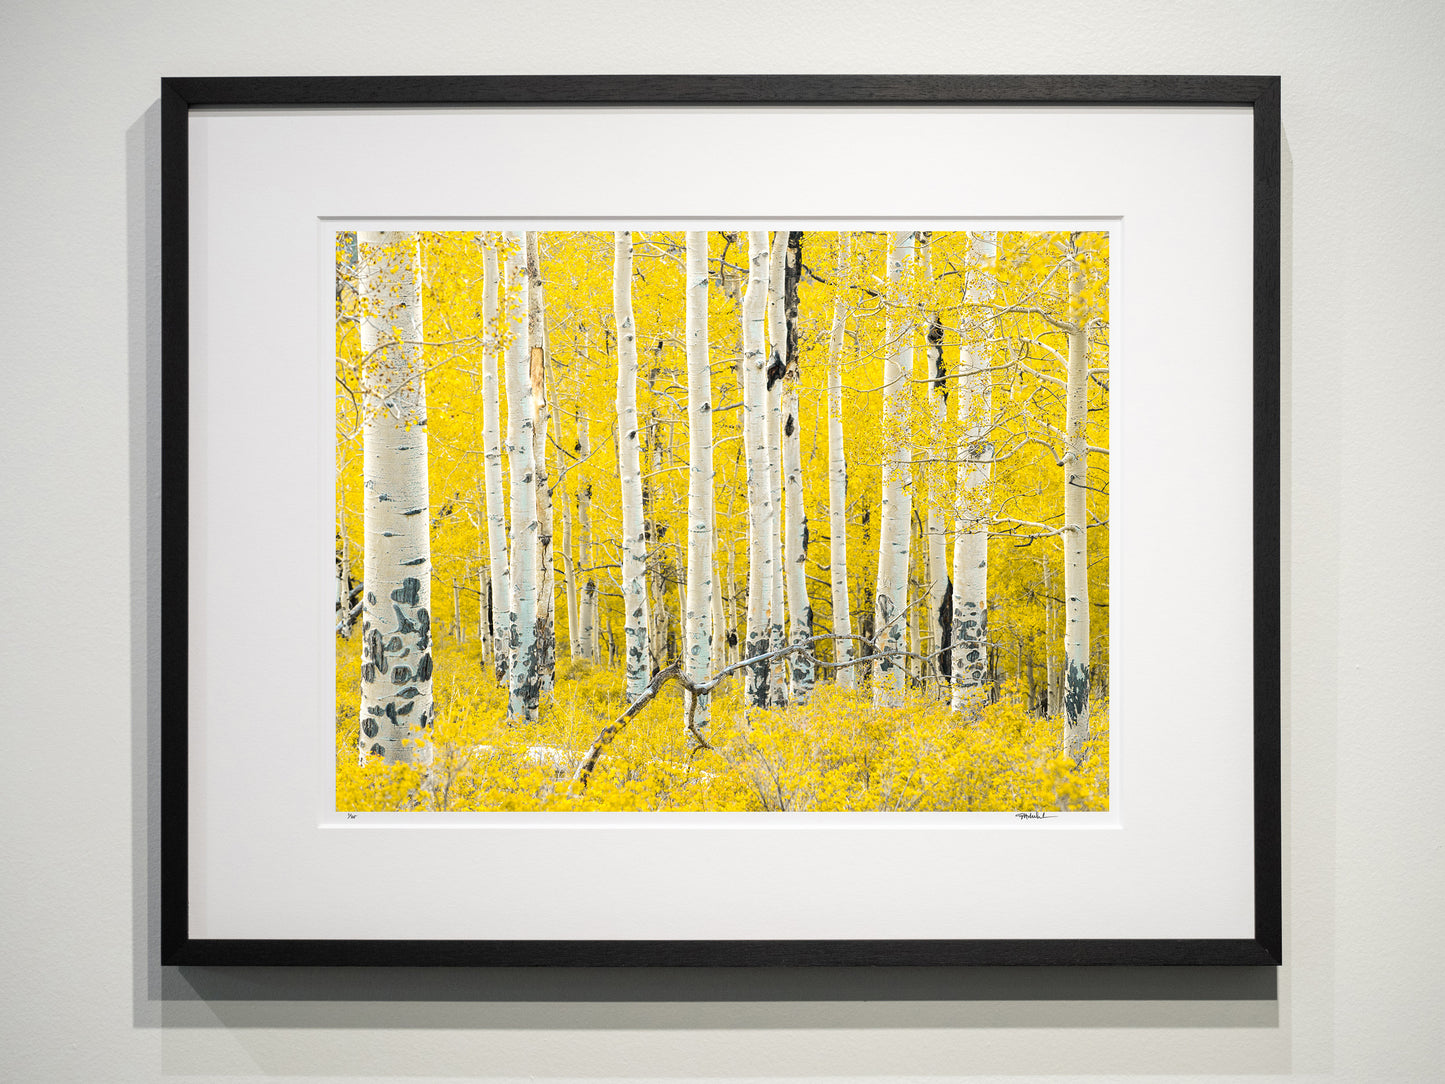 Methow Valley Aspen Stand 15x20 Limited Print